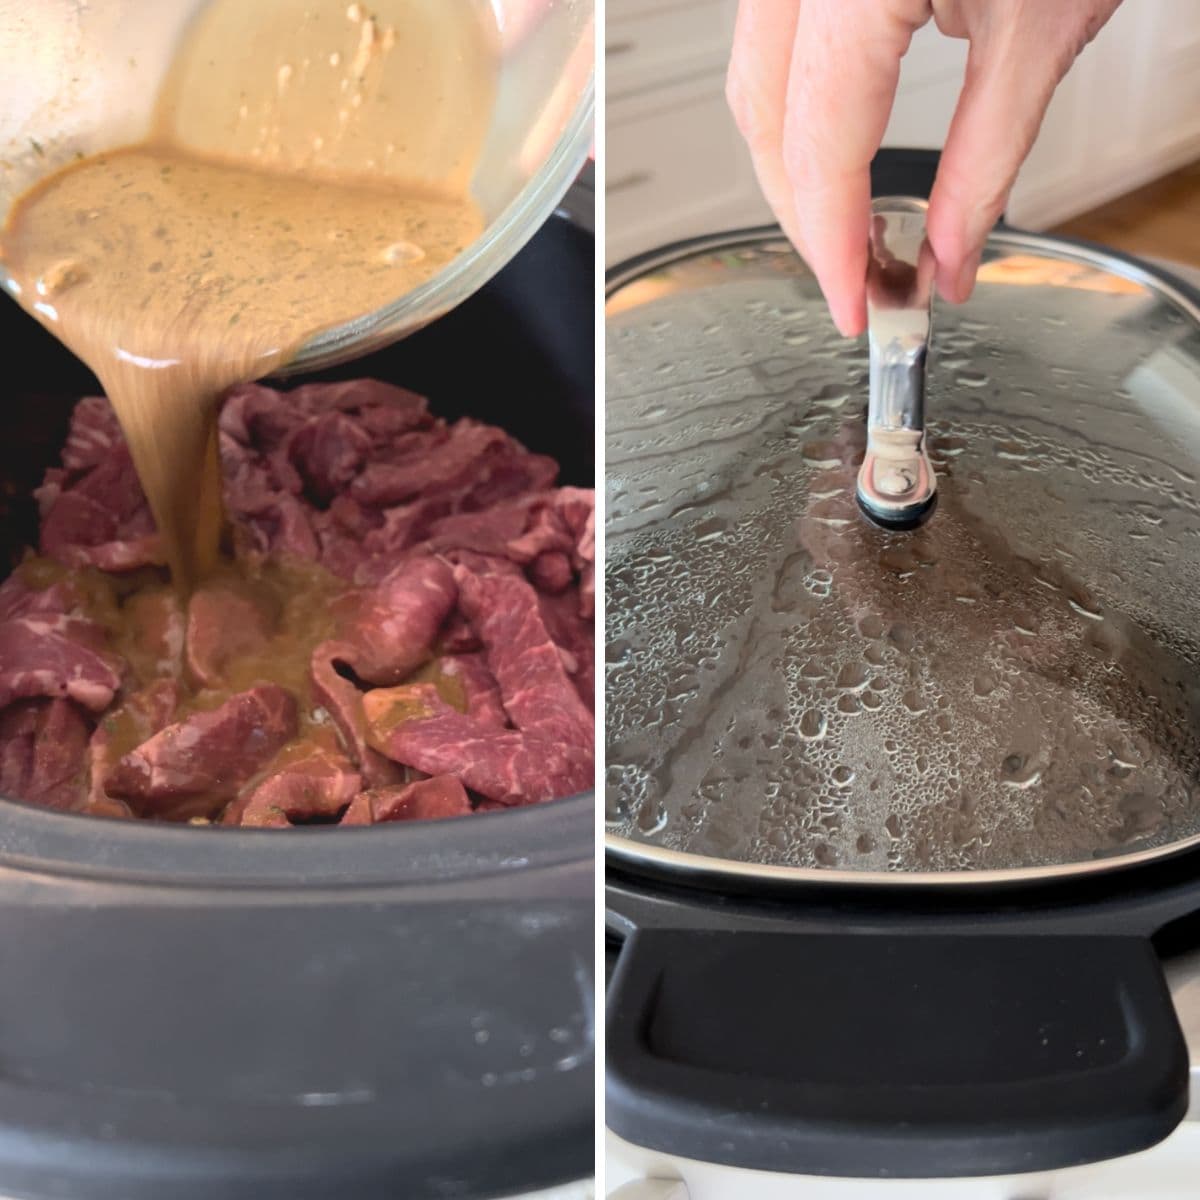 Pouring the gravy sauce over the steak and placing lid on top of the crock pot.